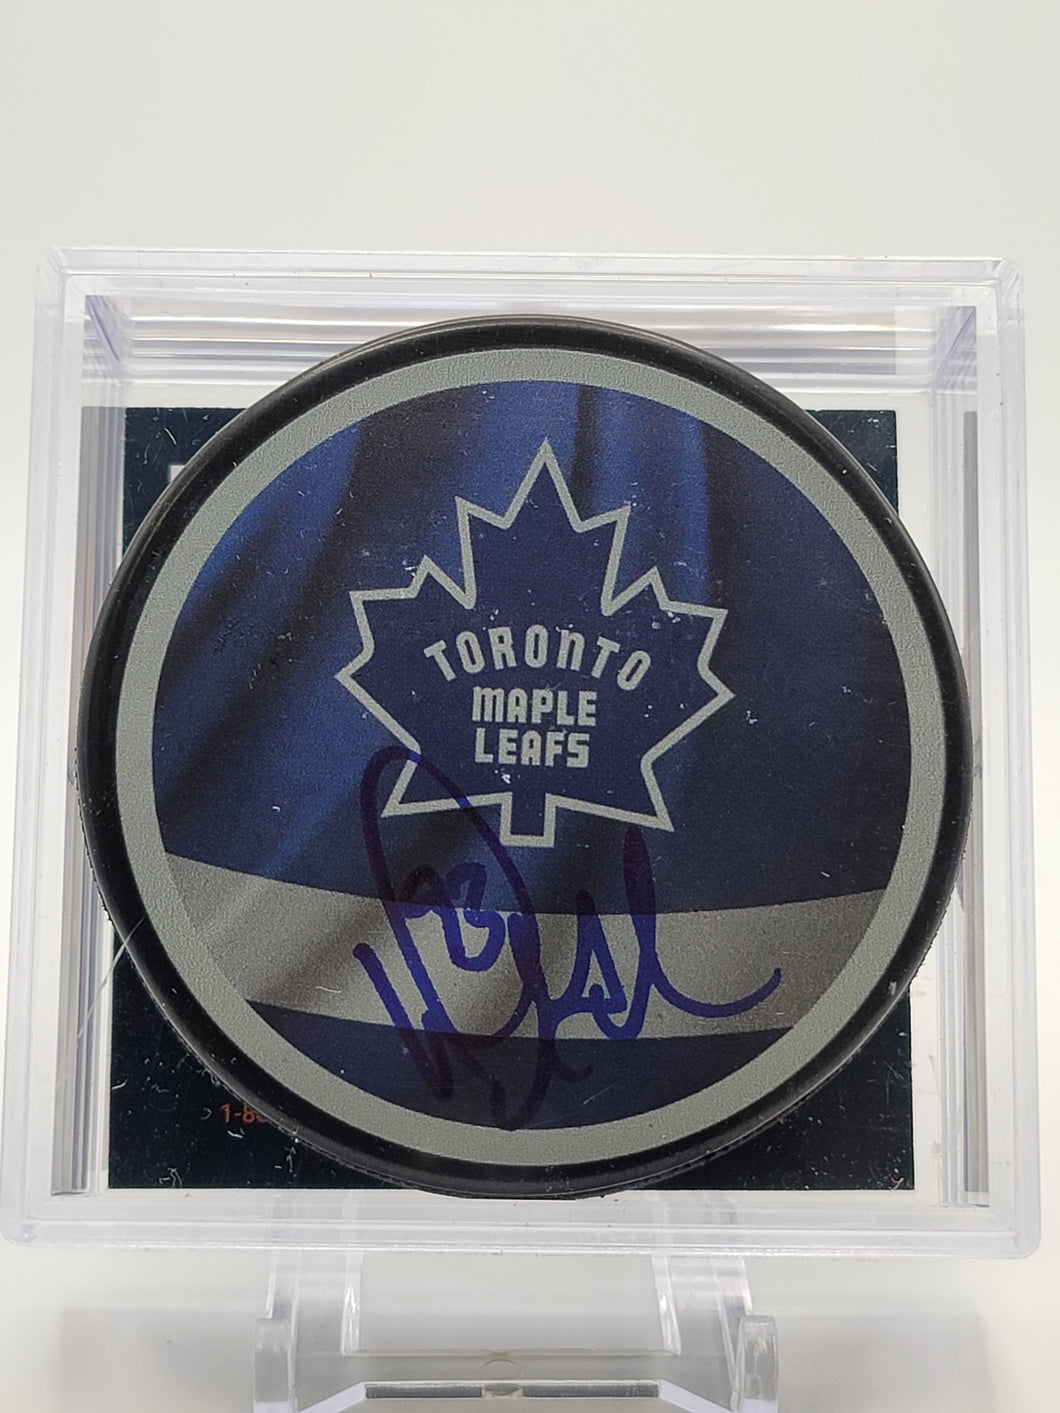 Doug Gilmour Autographed Puck Dave and Adams Authenticated 